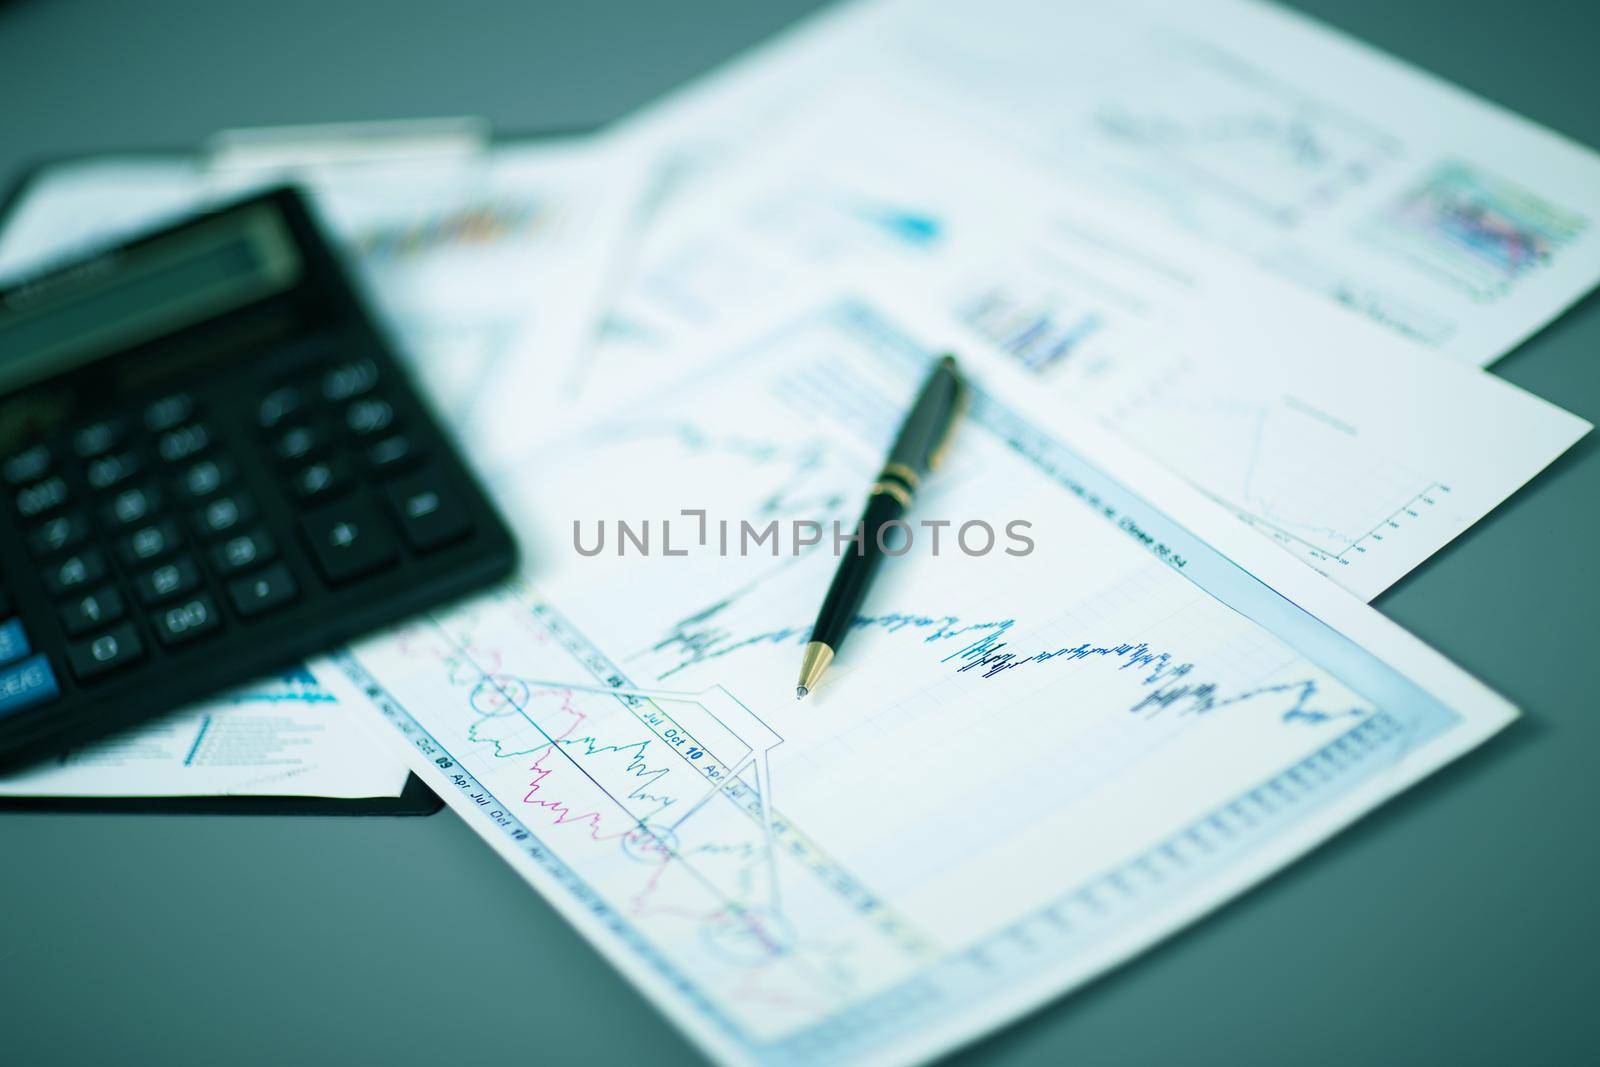 Stick with the charts and calculator at workplace by SmartPhotoLab